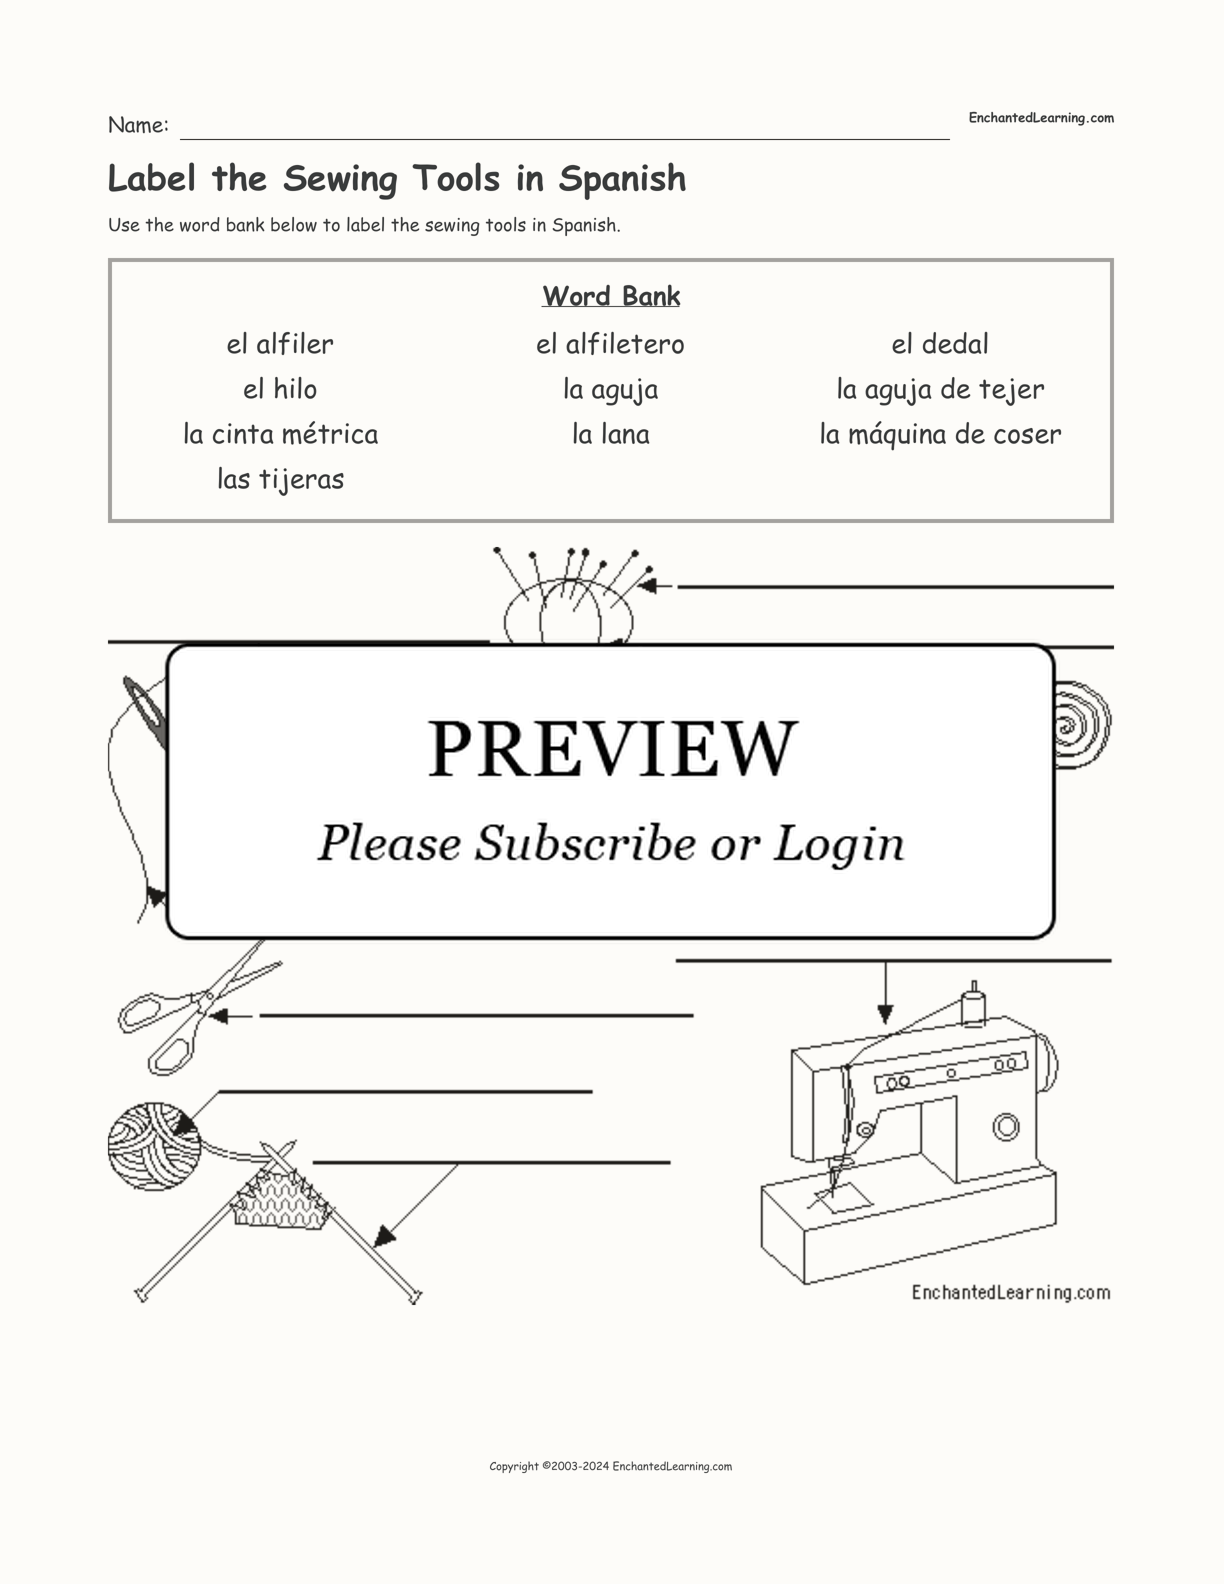 Label the Sewing Tools in Spanish interactive worksheet page 1